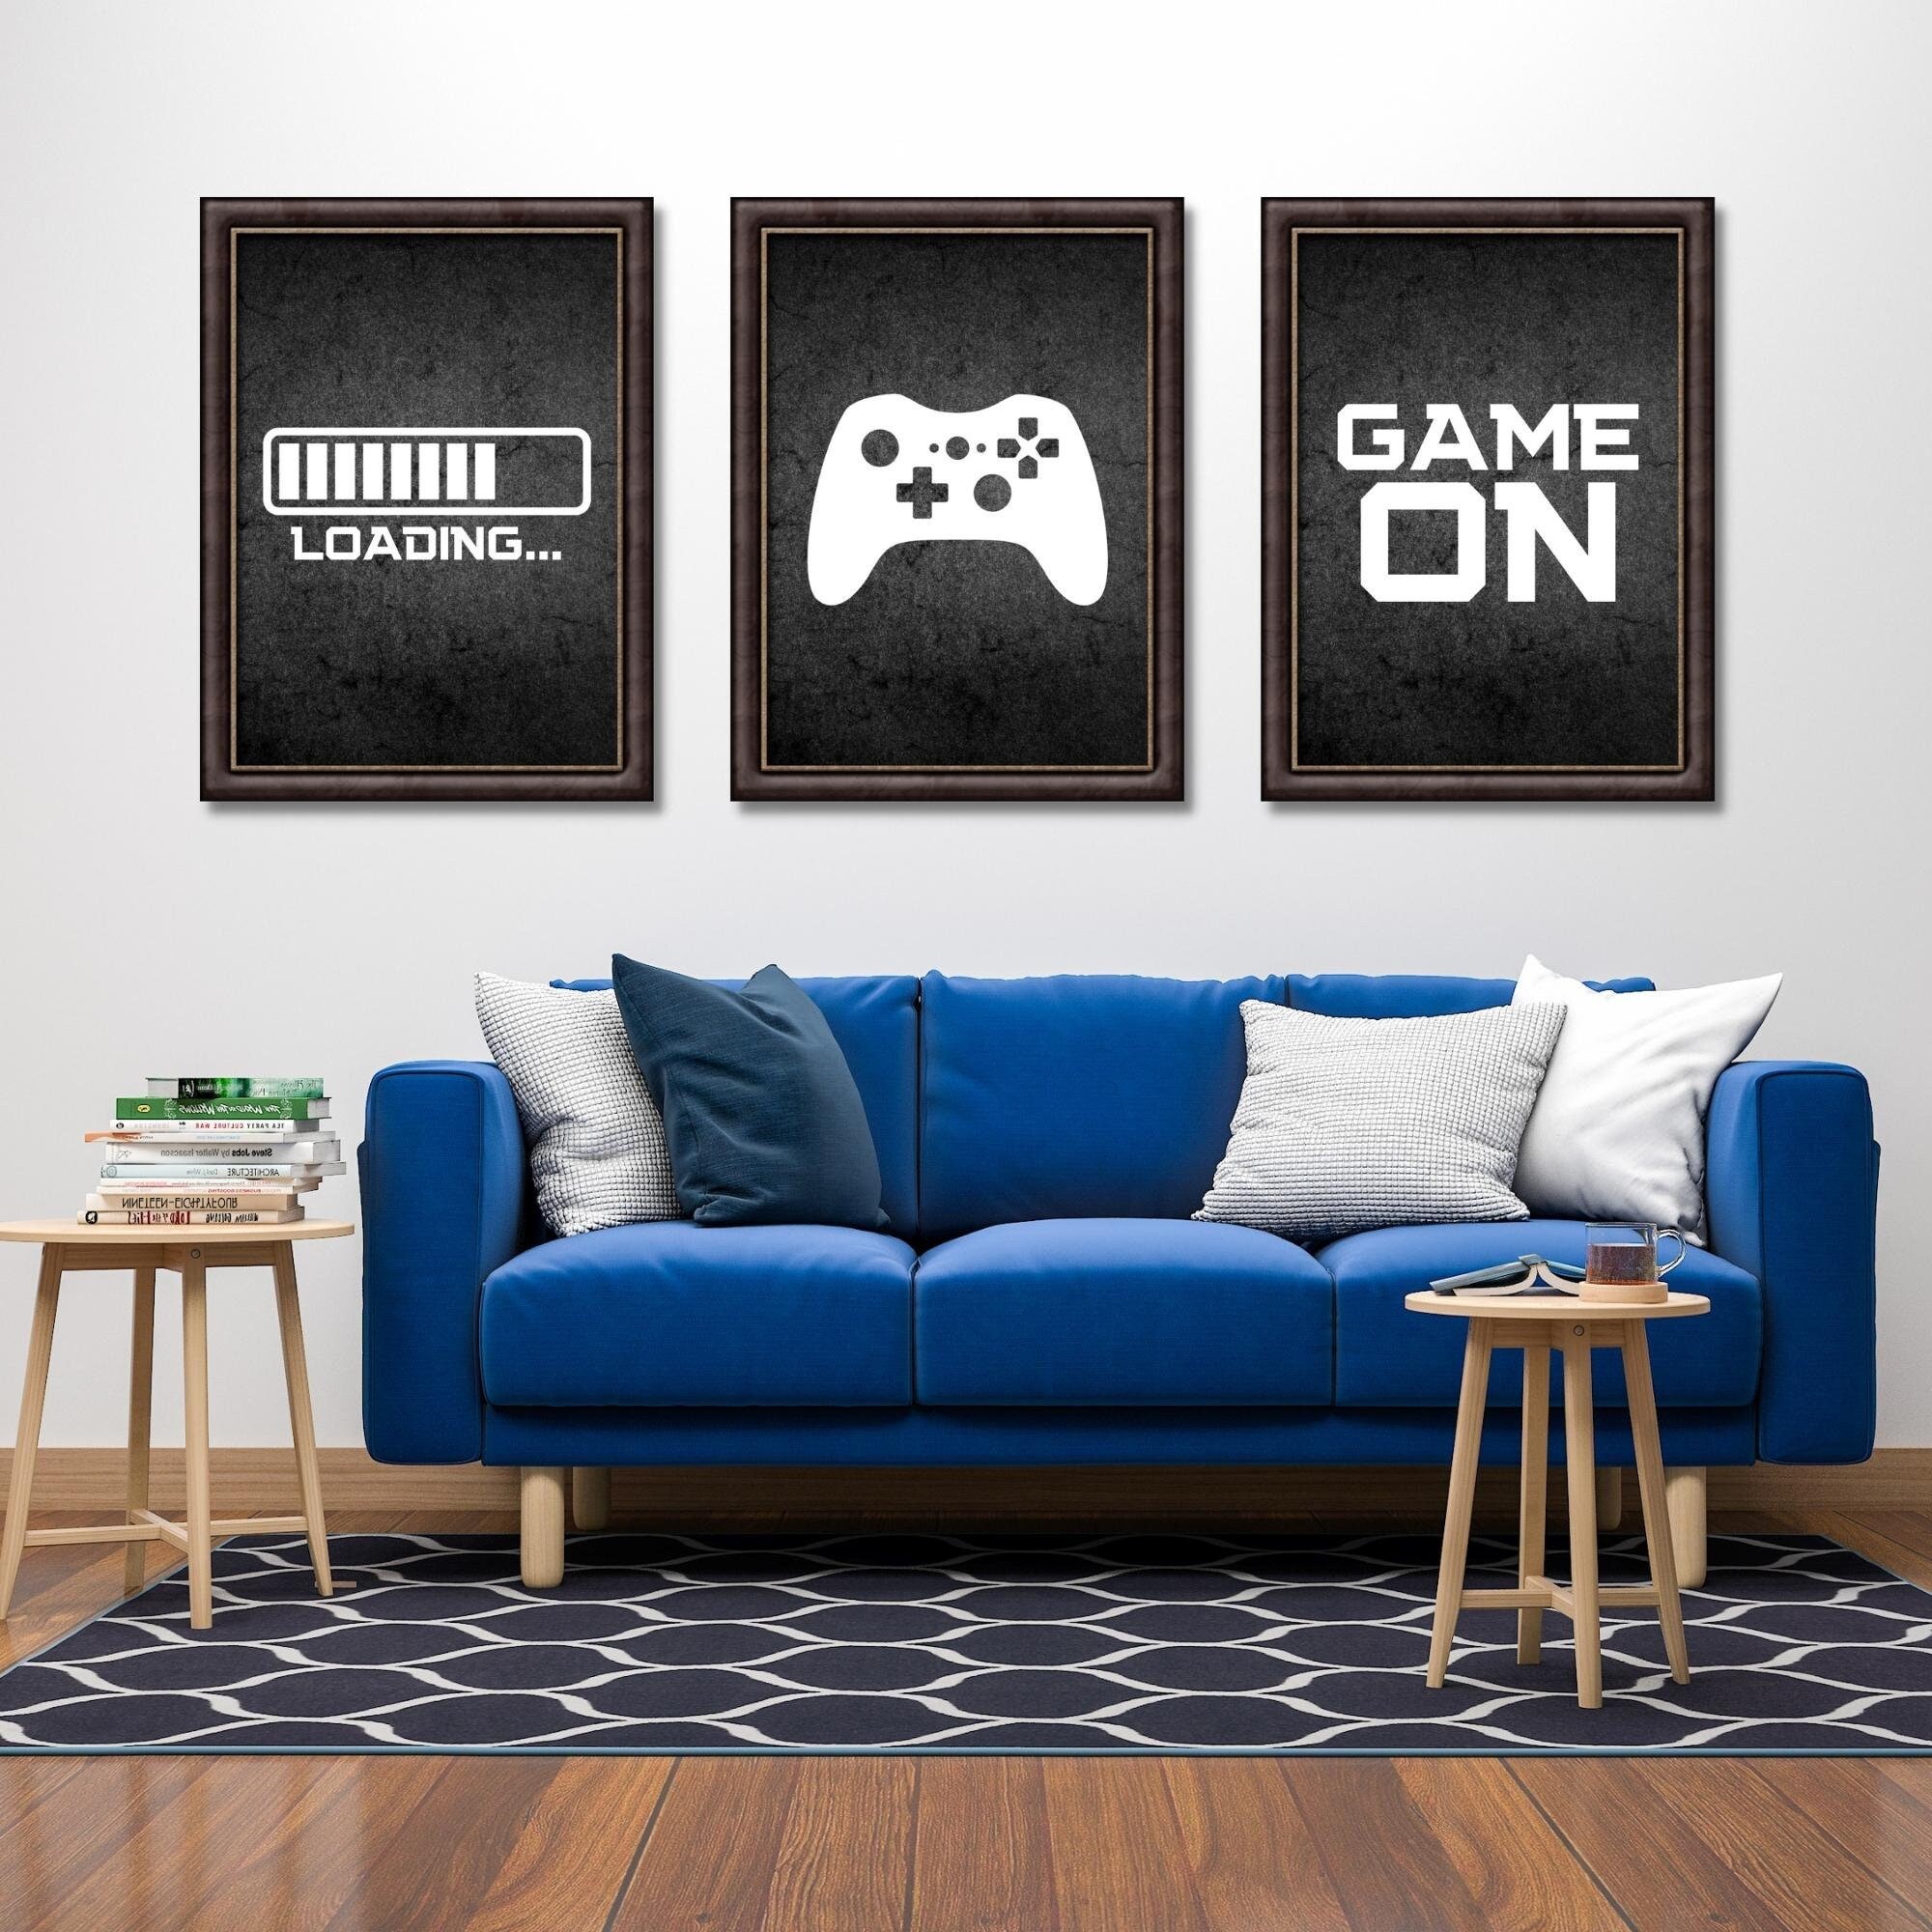 20 Cool Game Room Decor & Gaming Accessories to 3D Print